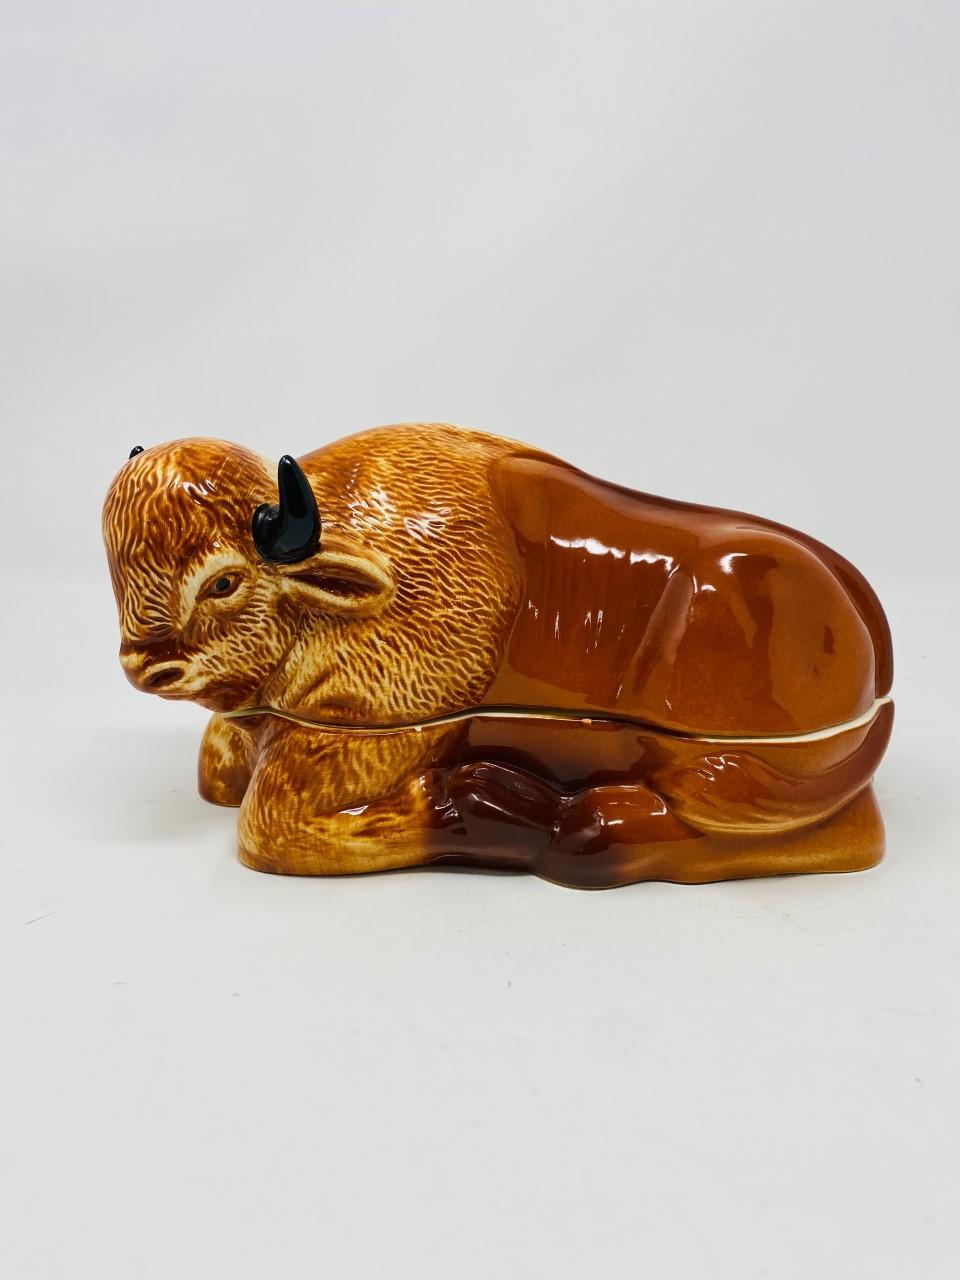 A large vintage figural recumbent Bison Pâté Terrine made for Laurent Caugant, a Bretagne pâté maker since 1927. His son Michel created these figural forms as containers for selling his fathers pâté in their luxury food shop. The two-piece terrine